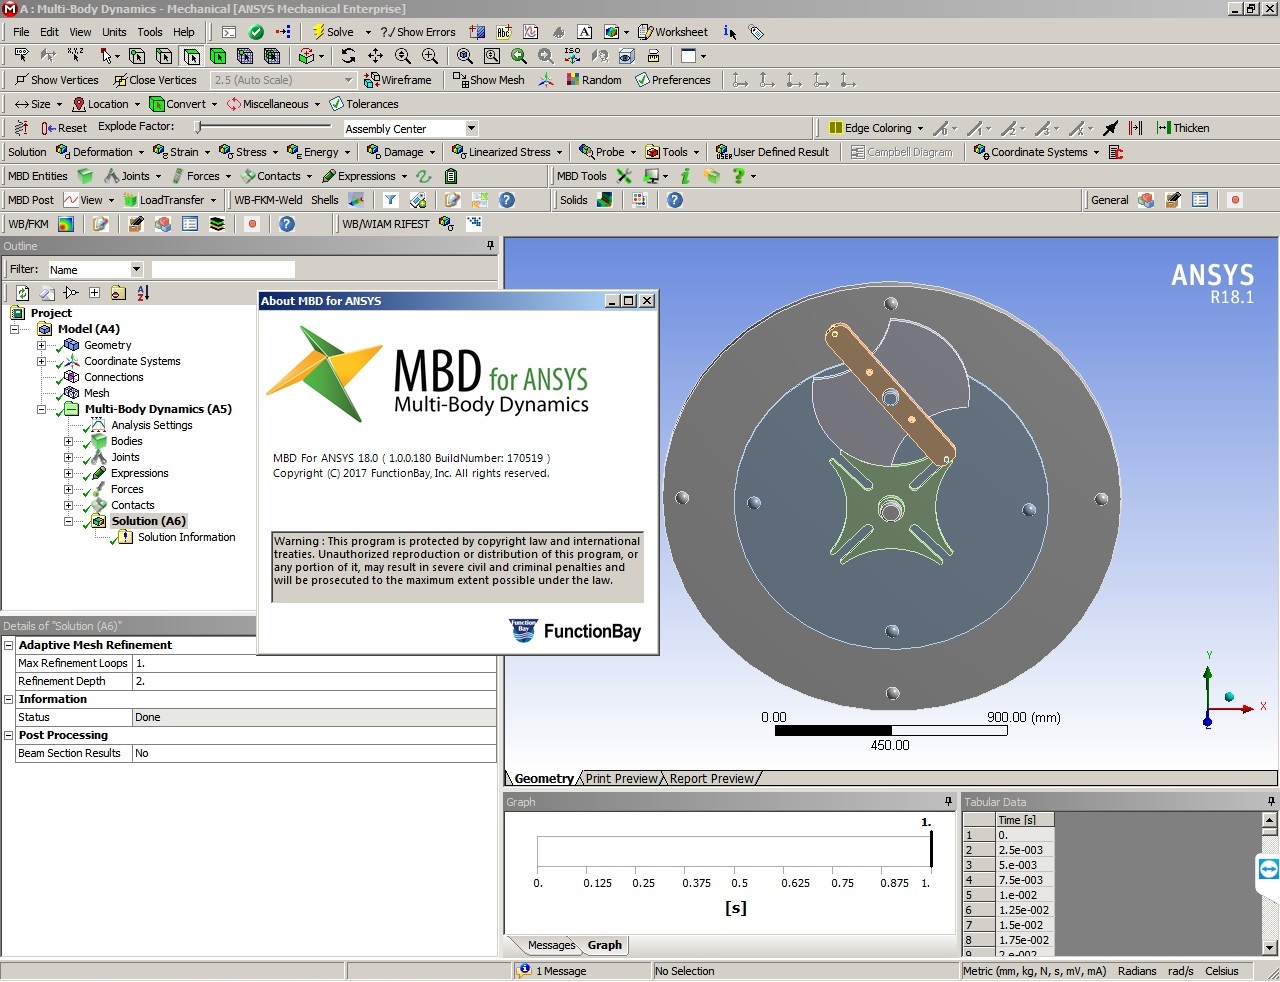 Working with FunctionBay Multi-Body Dynamics for ANSYS 18 full license